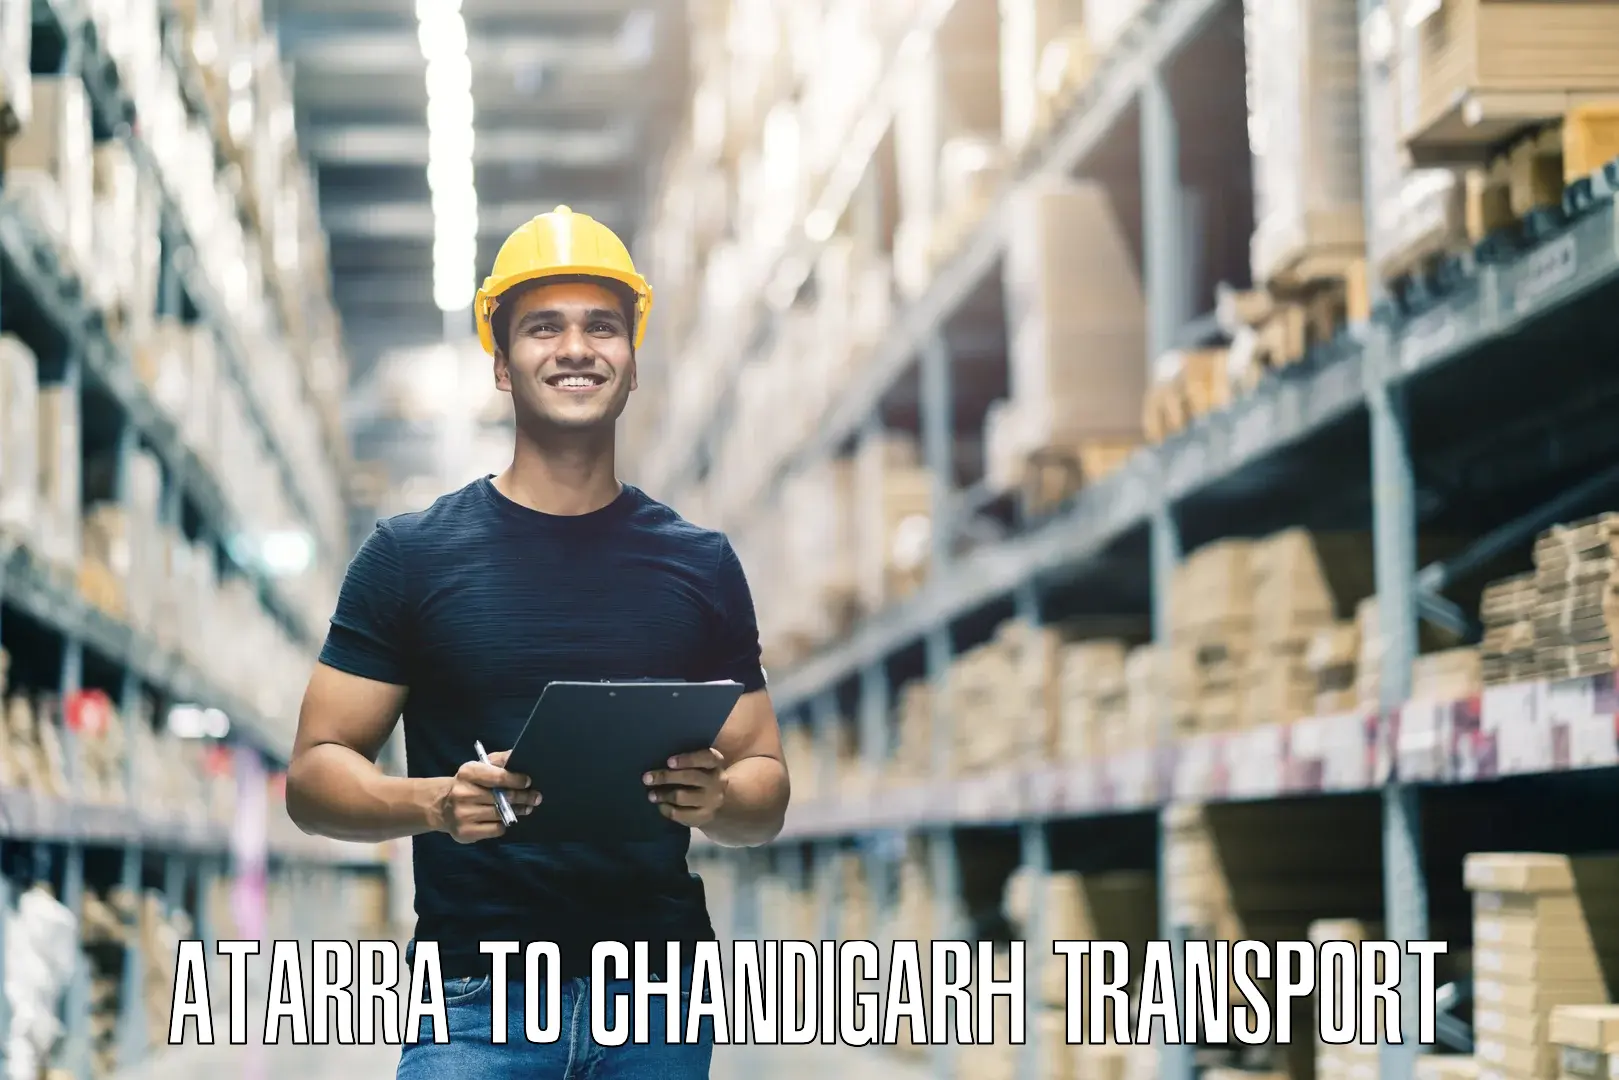 Transport bike from one state to another Atarra to Chandigarh